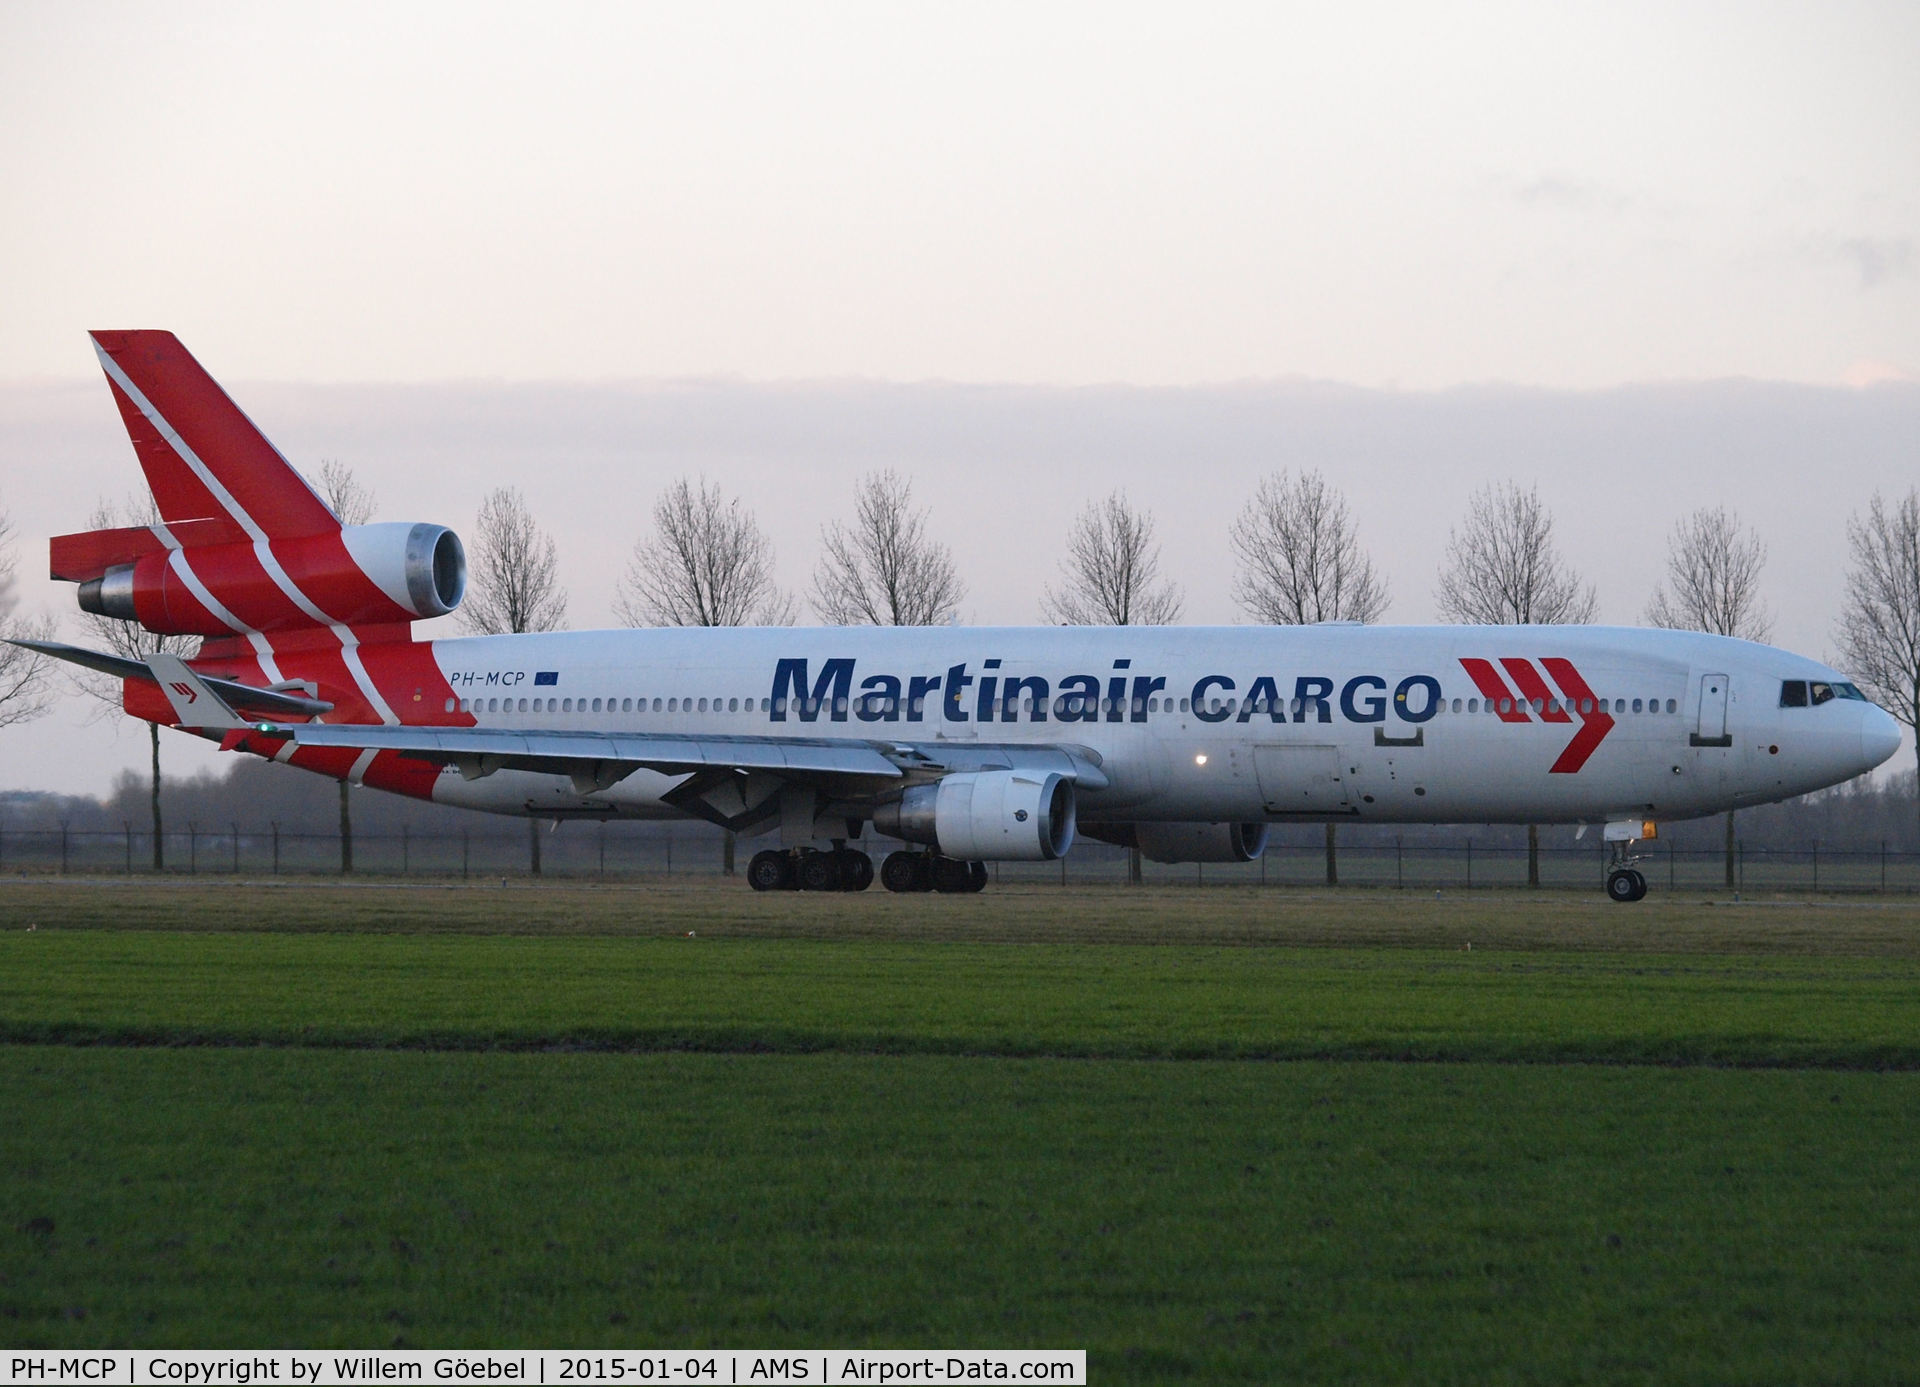 PH-MCP, 1994 McDonnell Douglas MD-11F C/N 48616, Taxi to runway 36L of Schiphol Airport